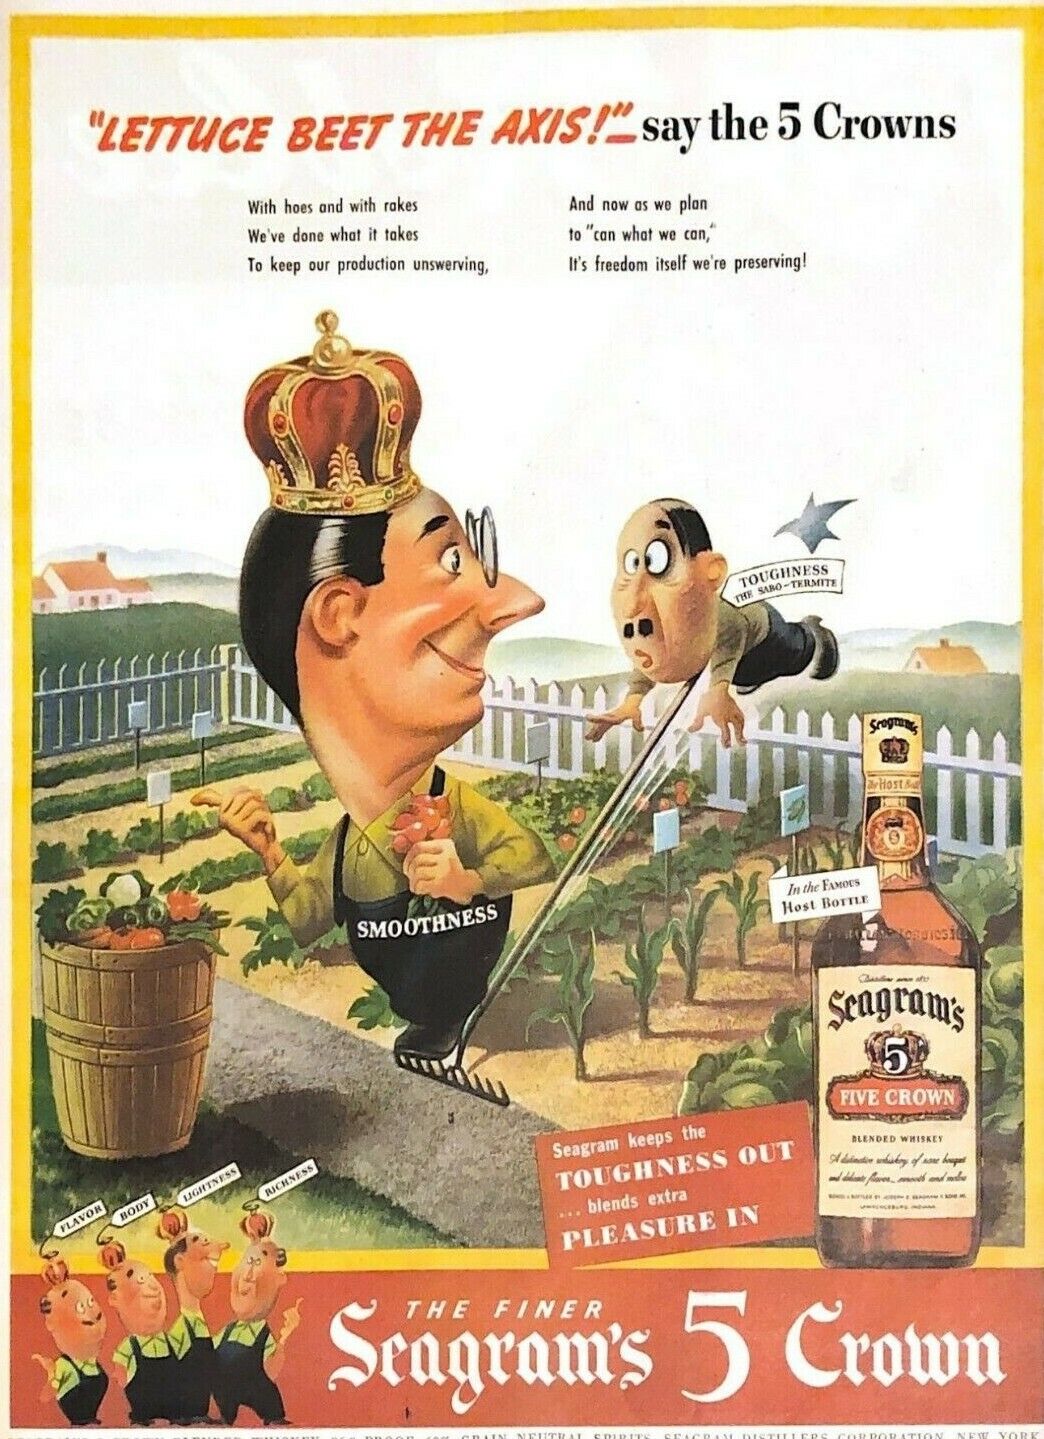 1943 Seagram\'s Vintage Print Ad WWII 5 Crowns Lettuce Beet The Axis 